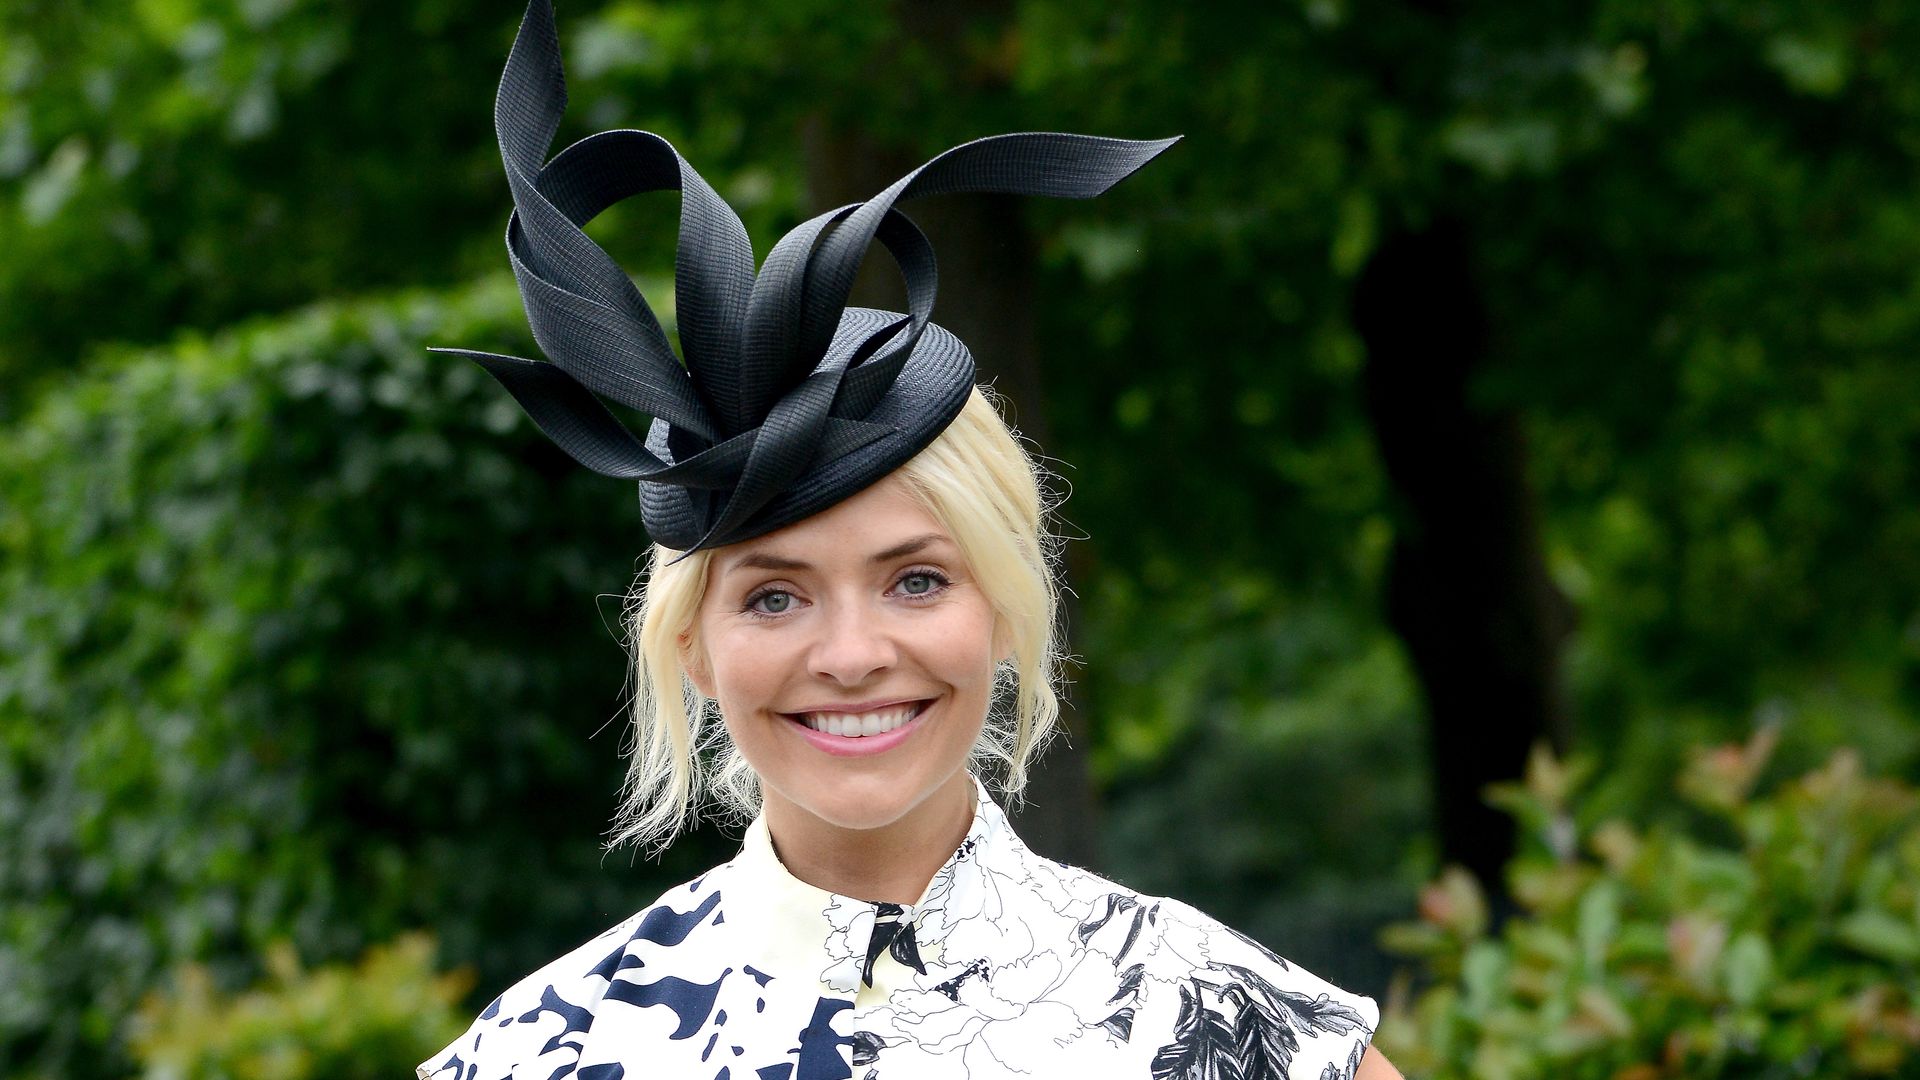 Holly Willoughby at Royal Ascot wearing floral dress and hat